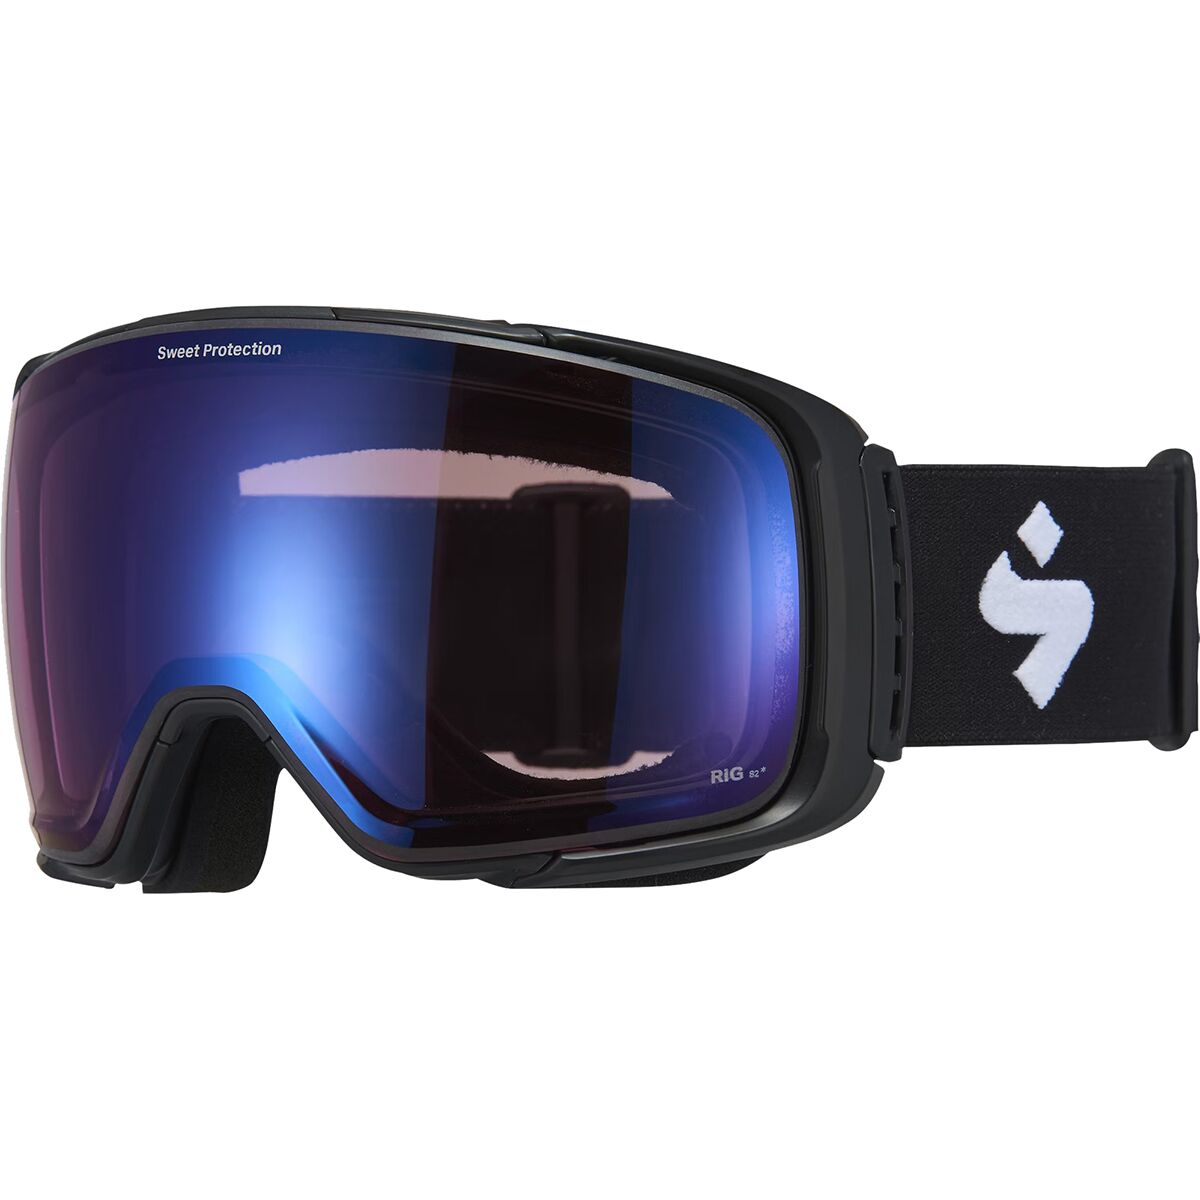 Sweet Protection Interstellar RIG Goggles